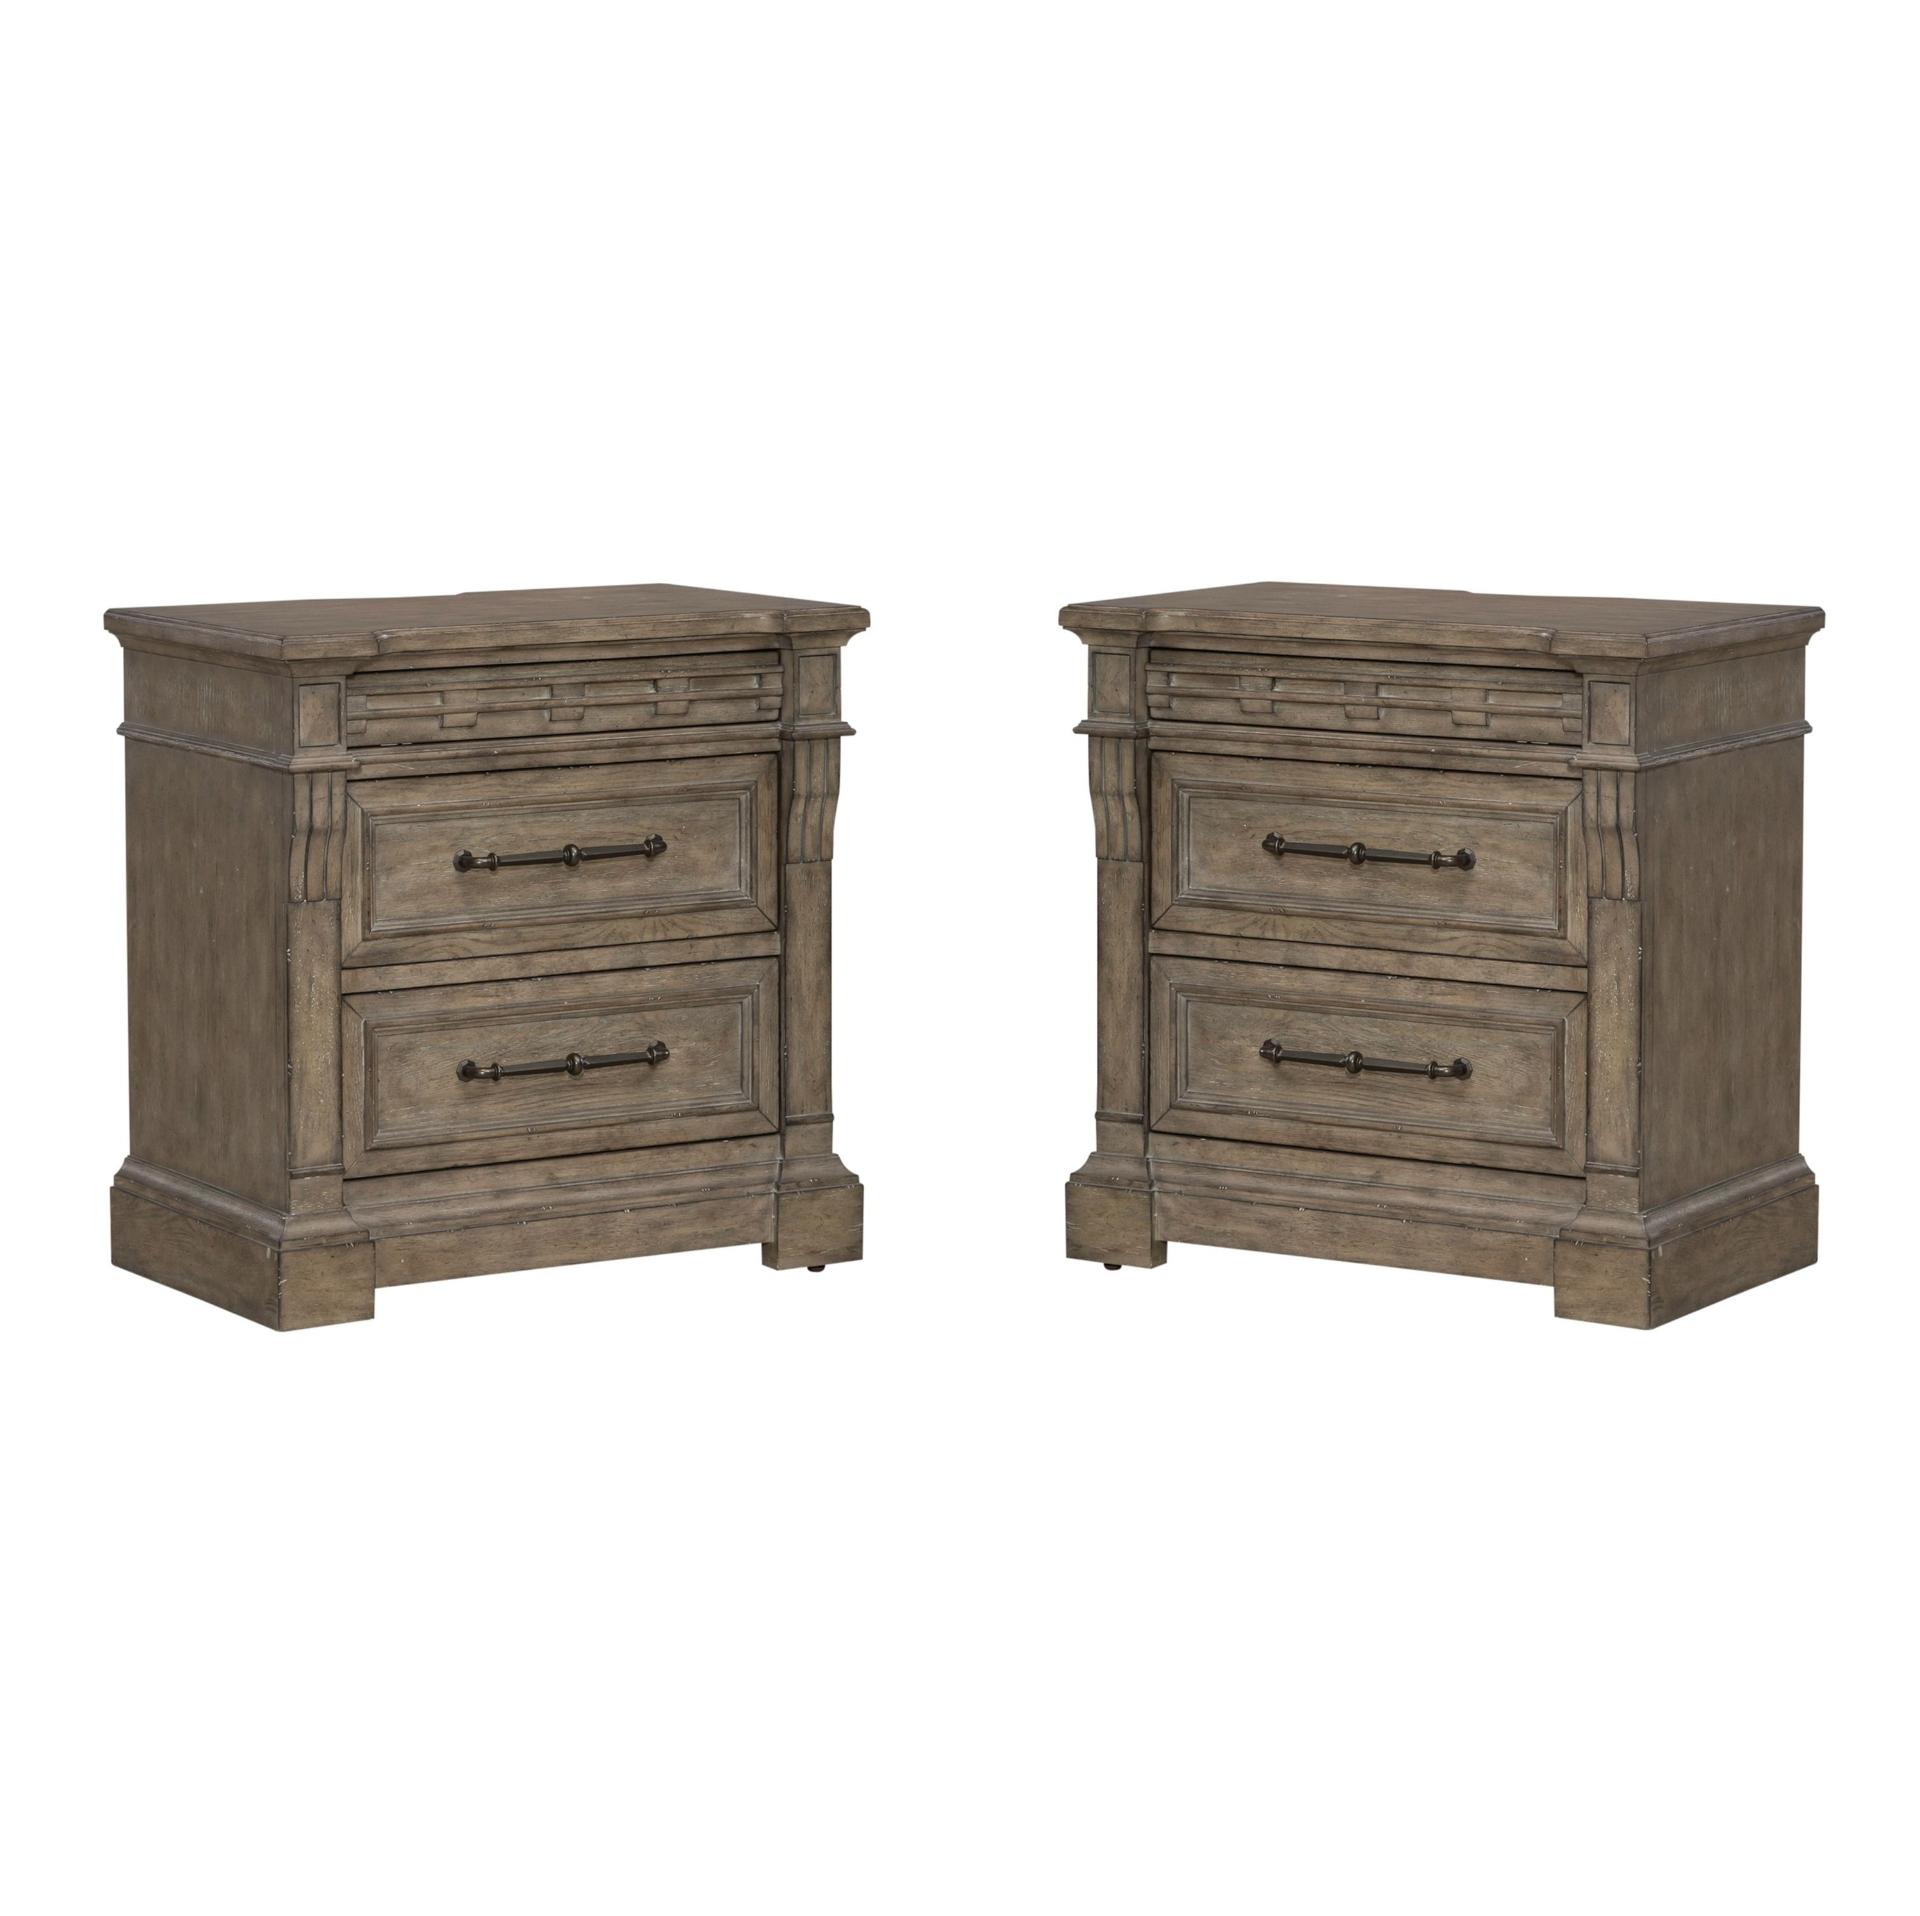 Transitional Nightstand Set Town & Country (711-BR) 711-BR61-Set-2 in Taupe 